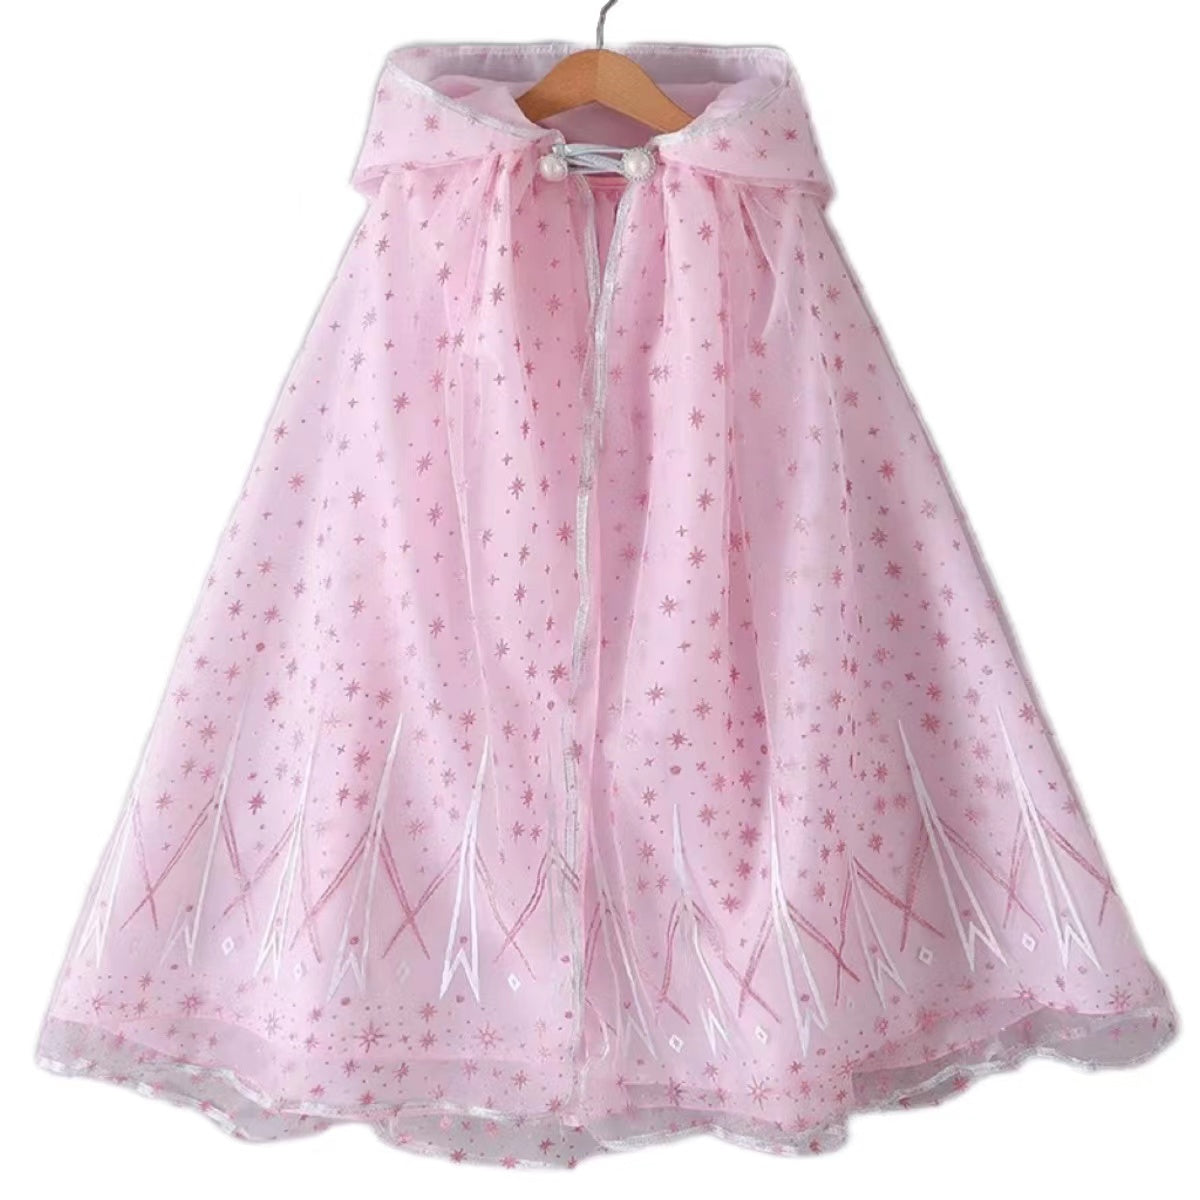 Sparkling Tulle Princess Cape for Girl